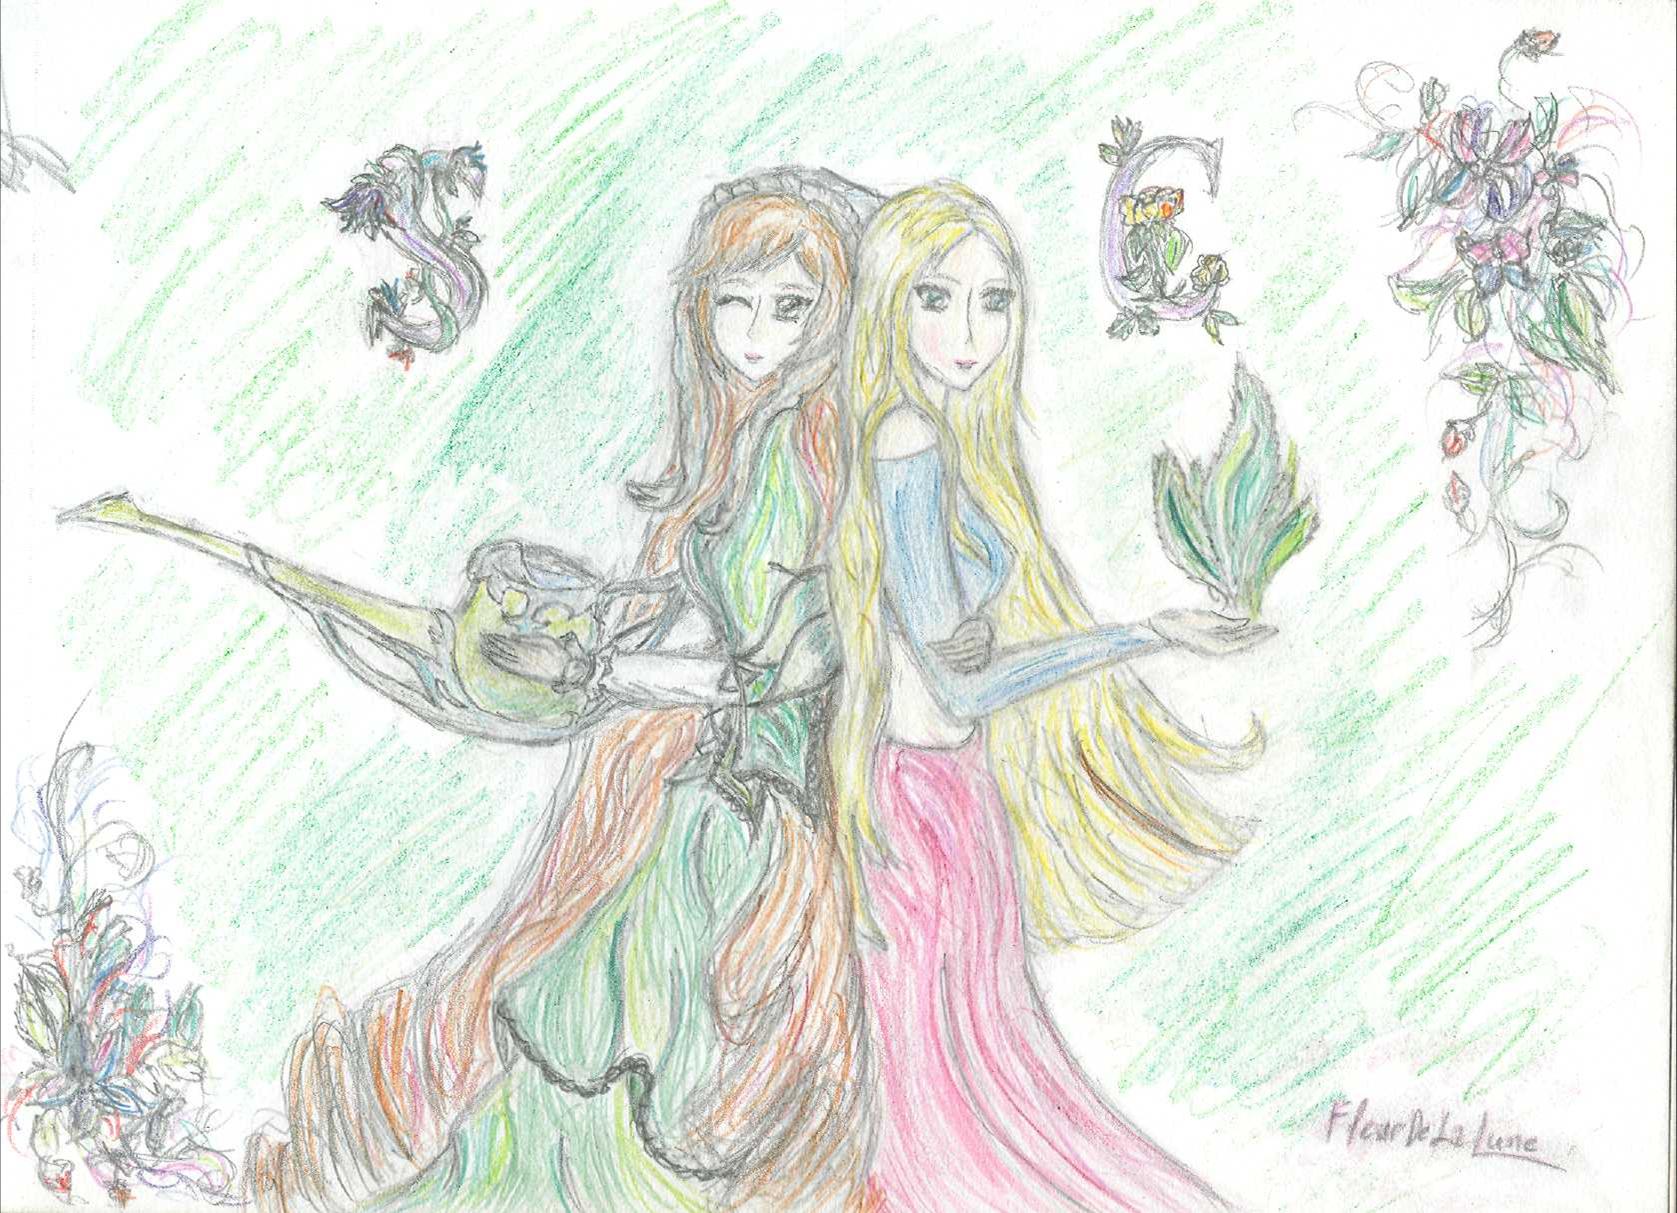 Mother Nature's girls: coloured by FleurDeLaLune